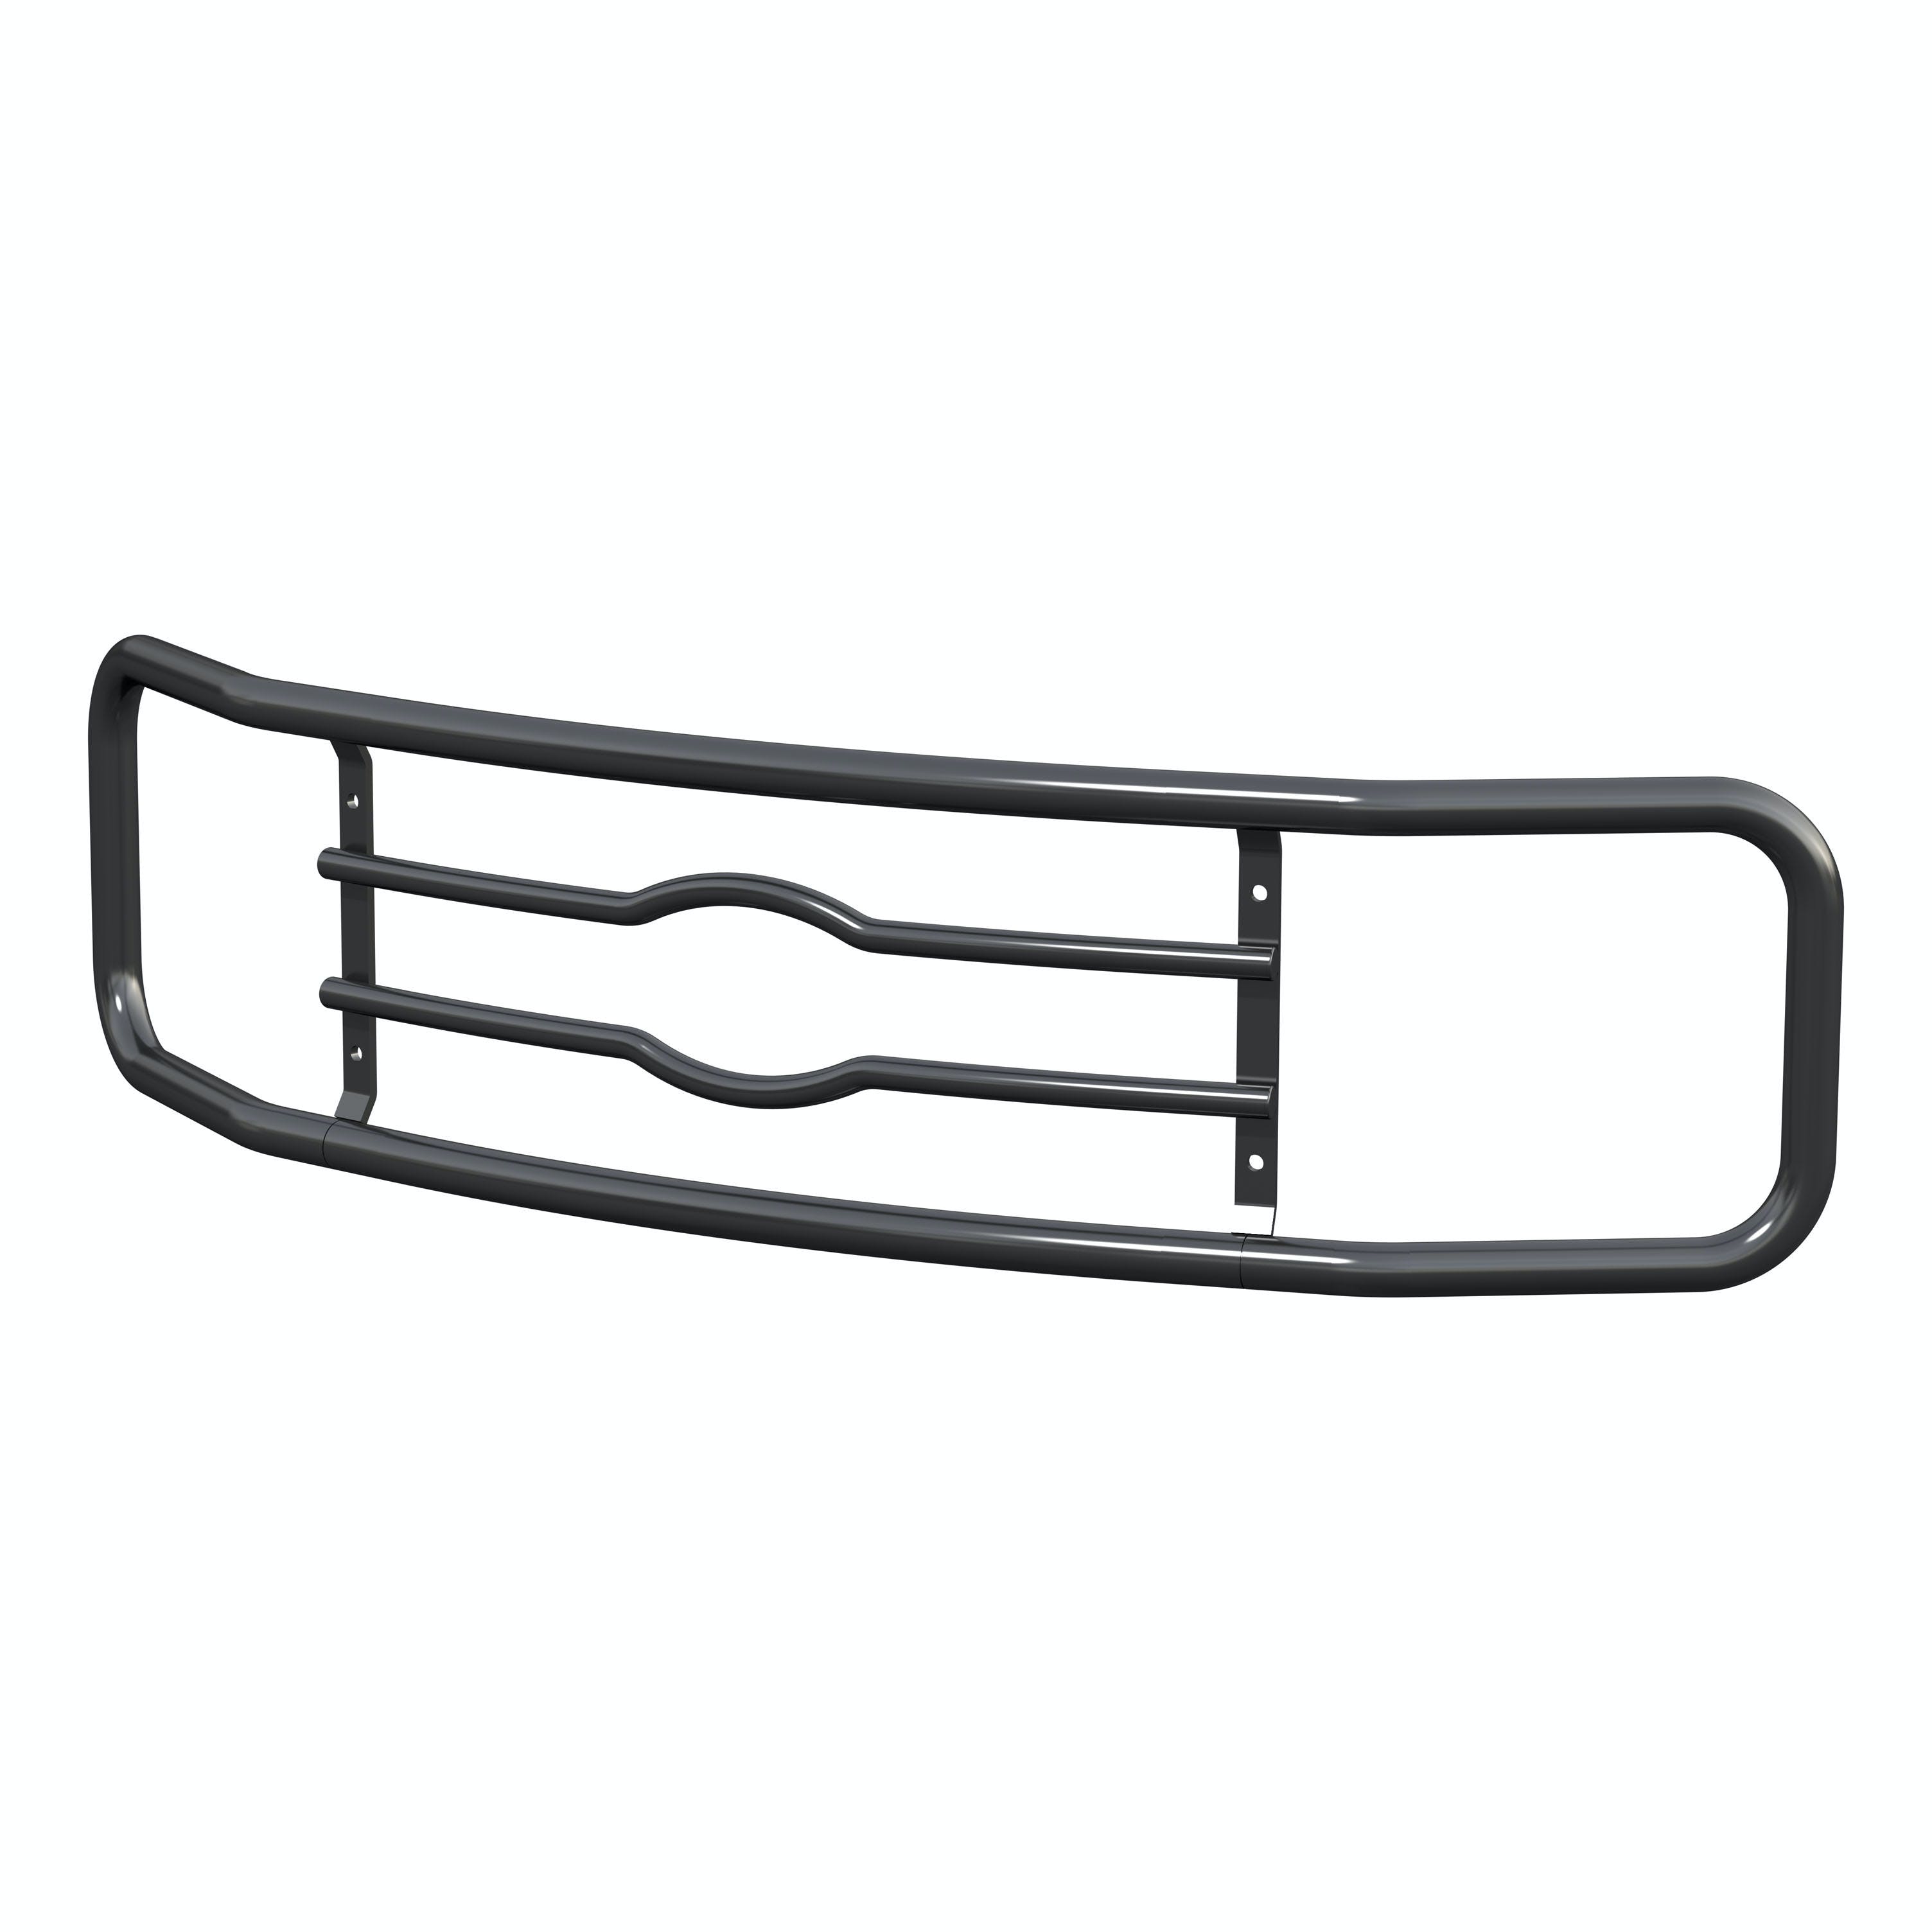 LUVERNE 341523 2 inch Tubular Grille Guard Ring Assembly